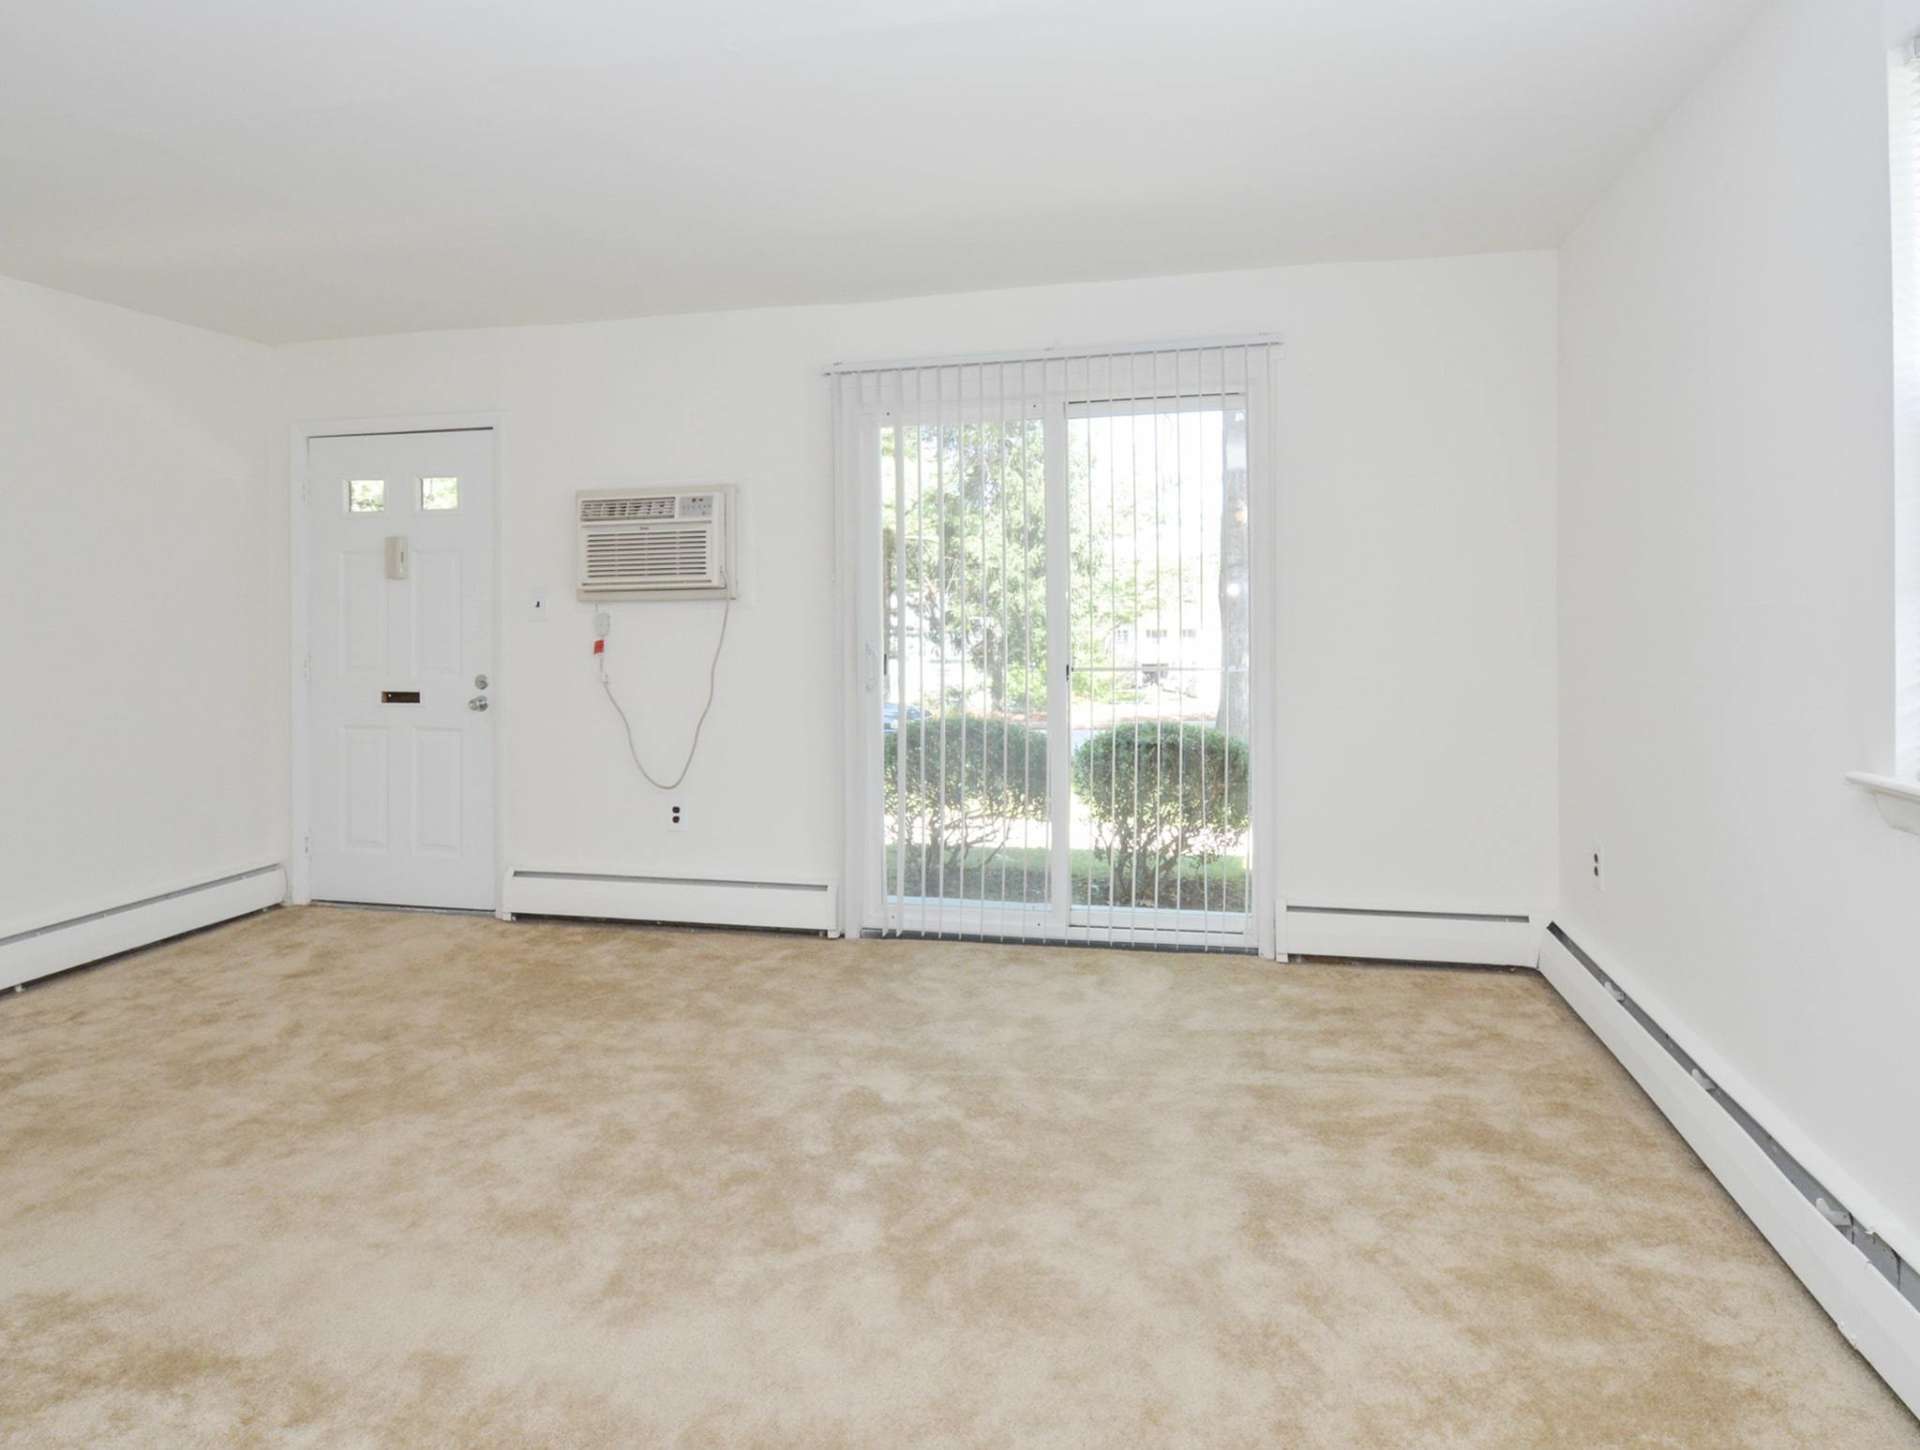 Spacious living room area with beige carpets and sliding glass doors.